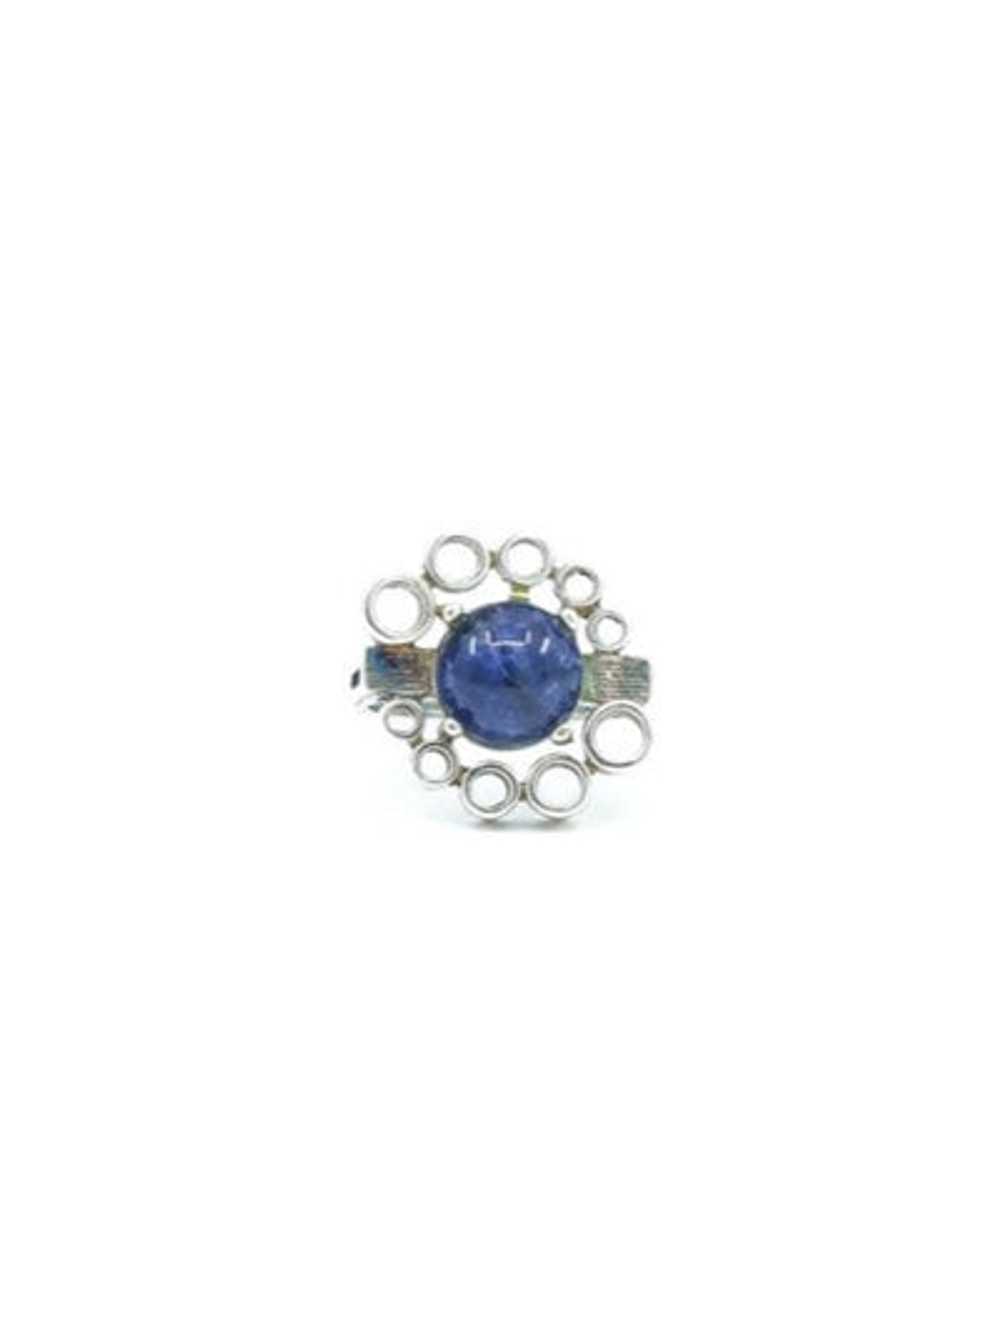 Sterling Silver Lapis Stone Ring - image 1